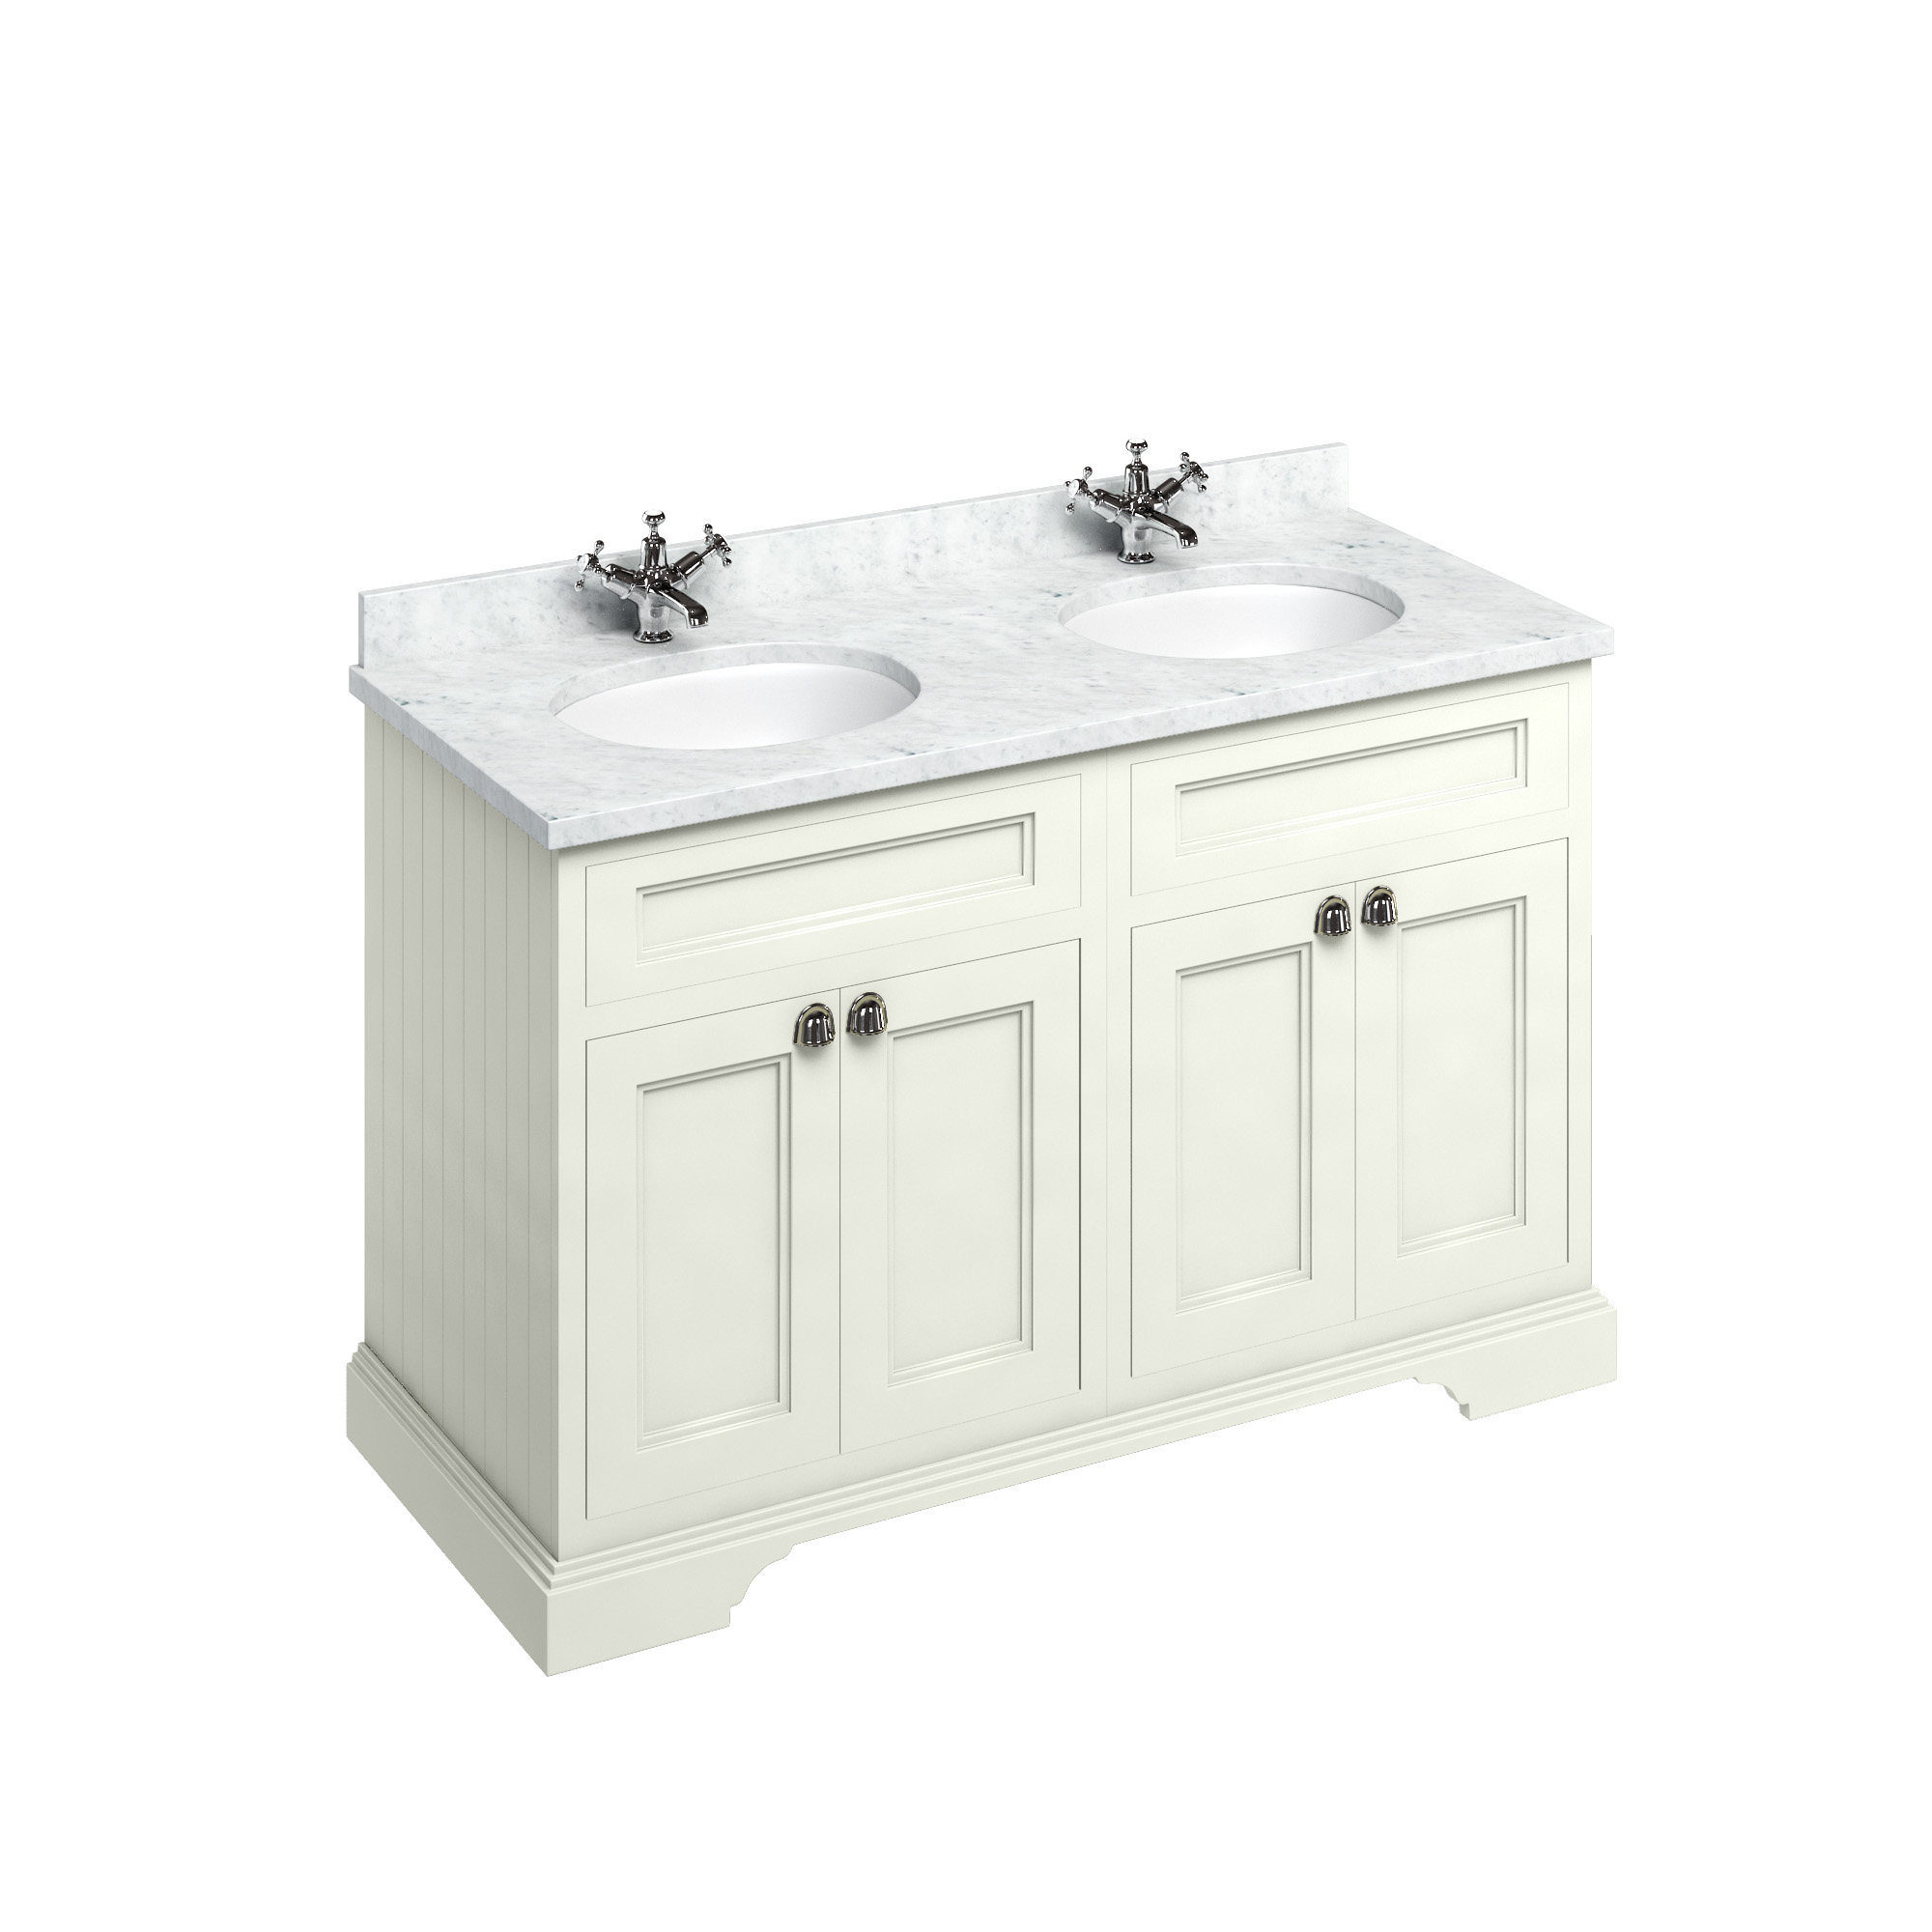 Freestanding 130 Vanity Unit with doors - Sand and Minerva Carrara white worktop with two integrated white basins